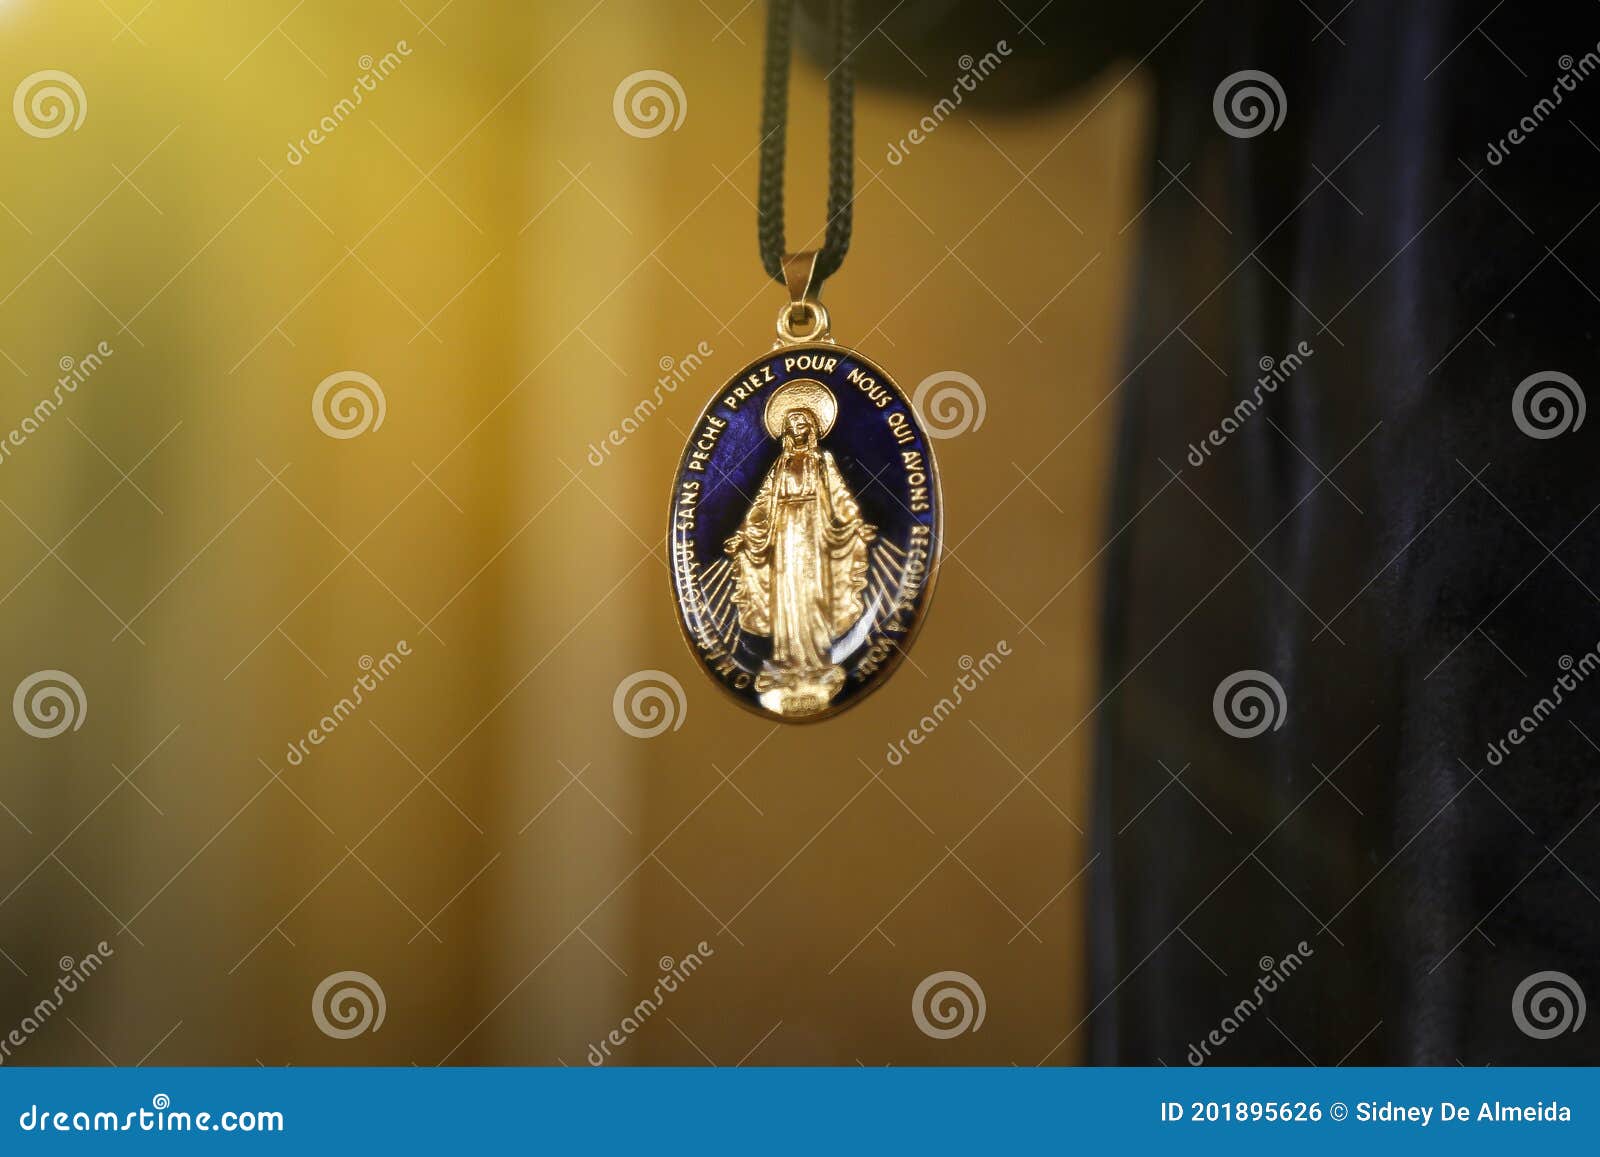 medal of our lady of graces